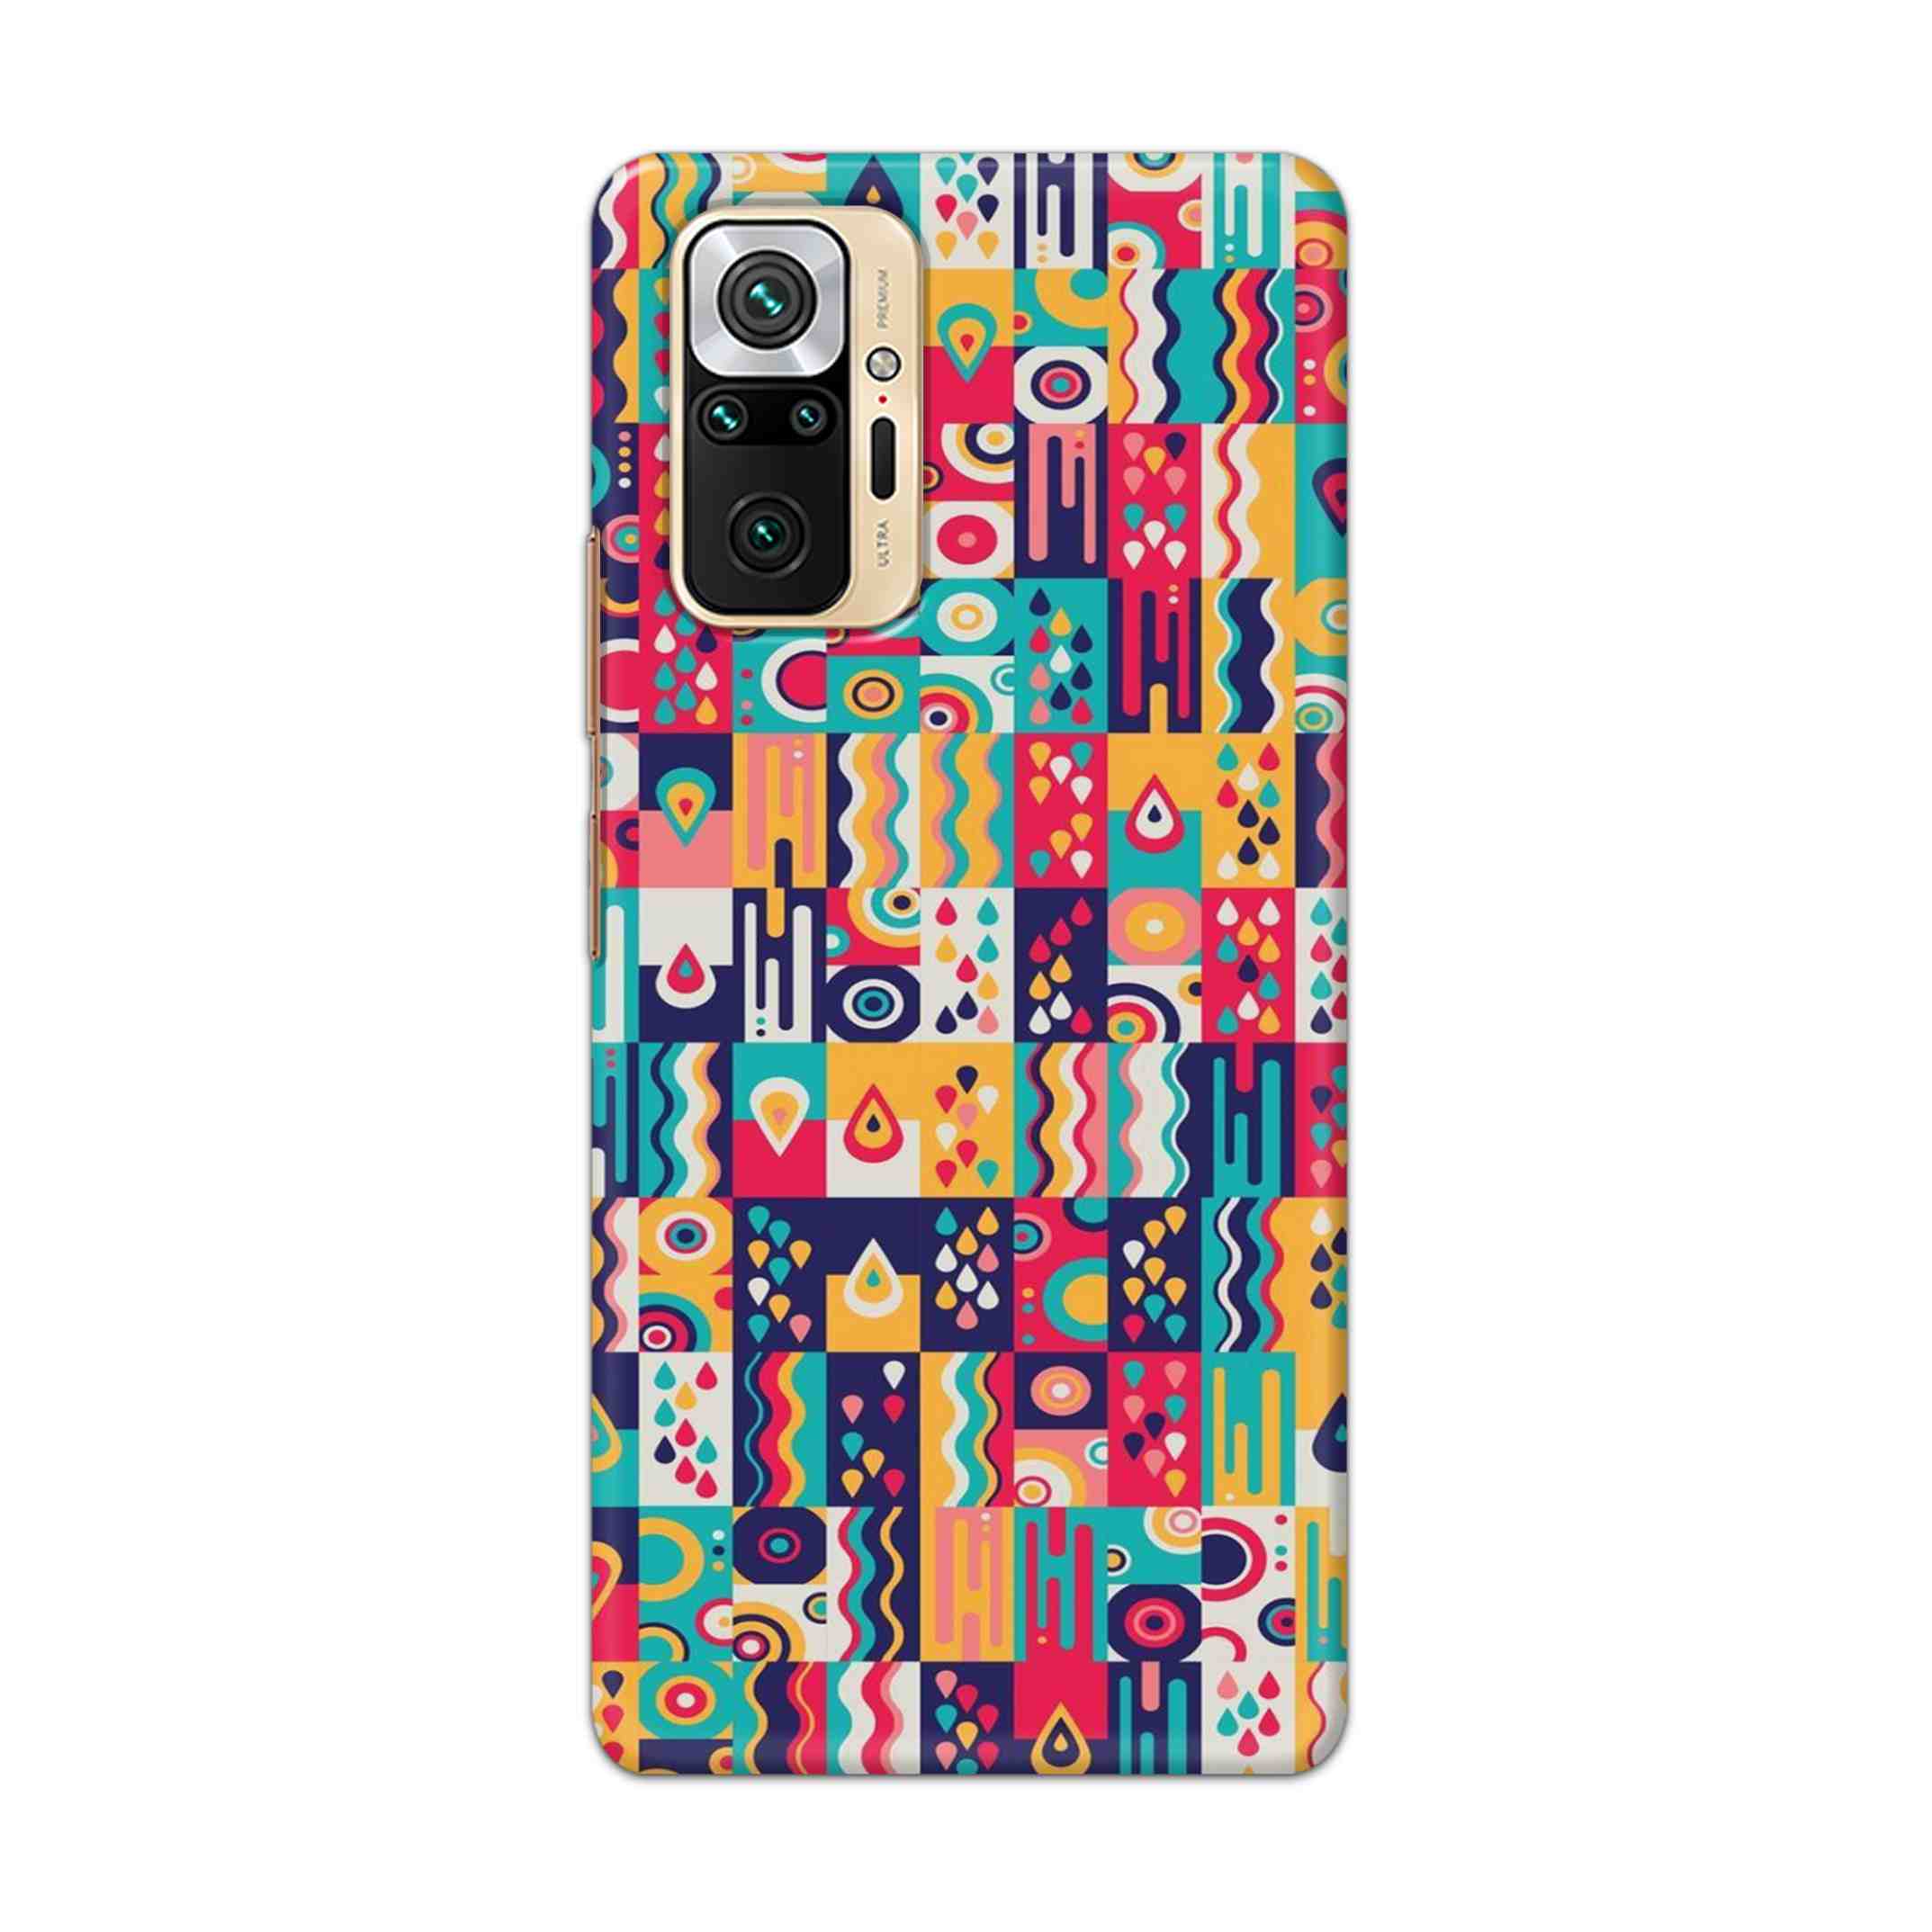 Buy Art Hard Back Mobile Phone Case Cover For Redmi Note 10 Pro Online